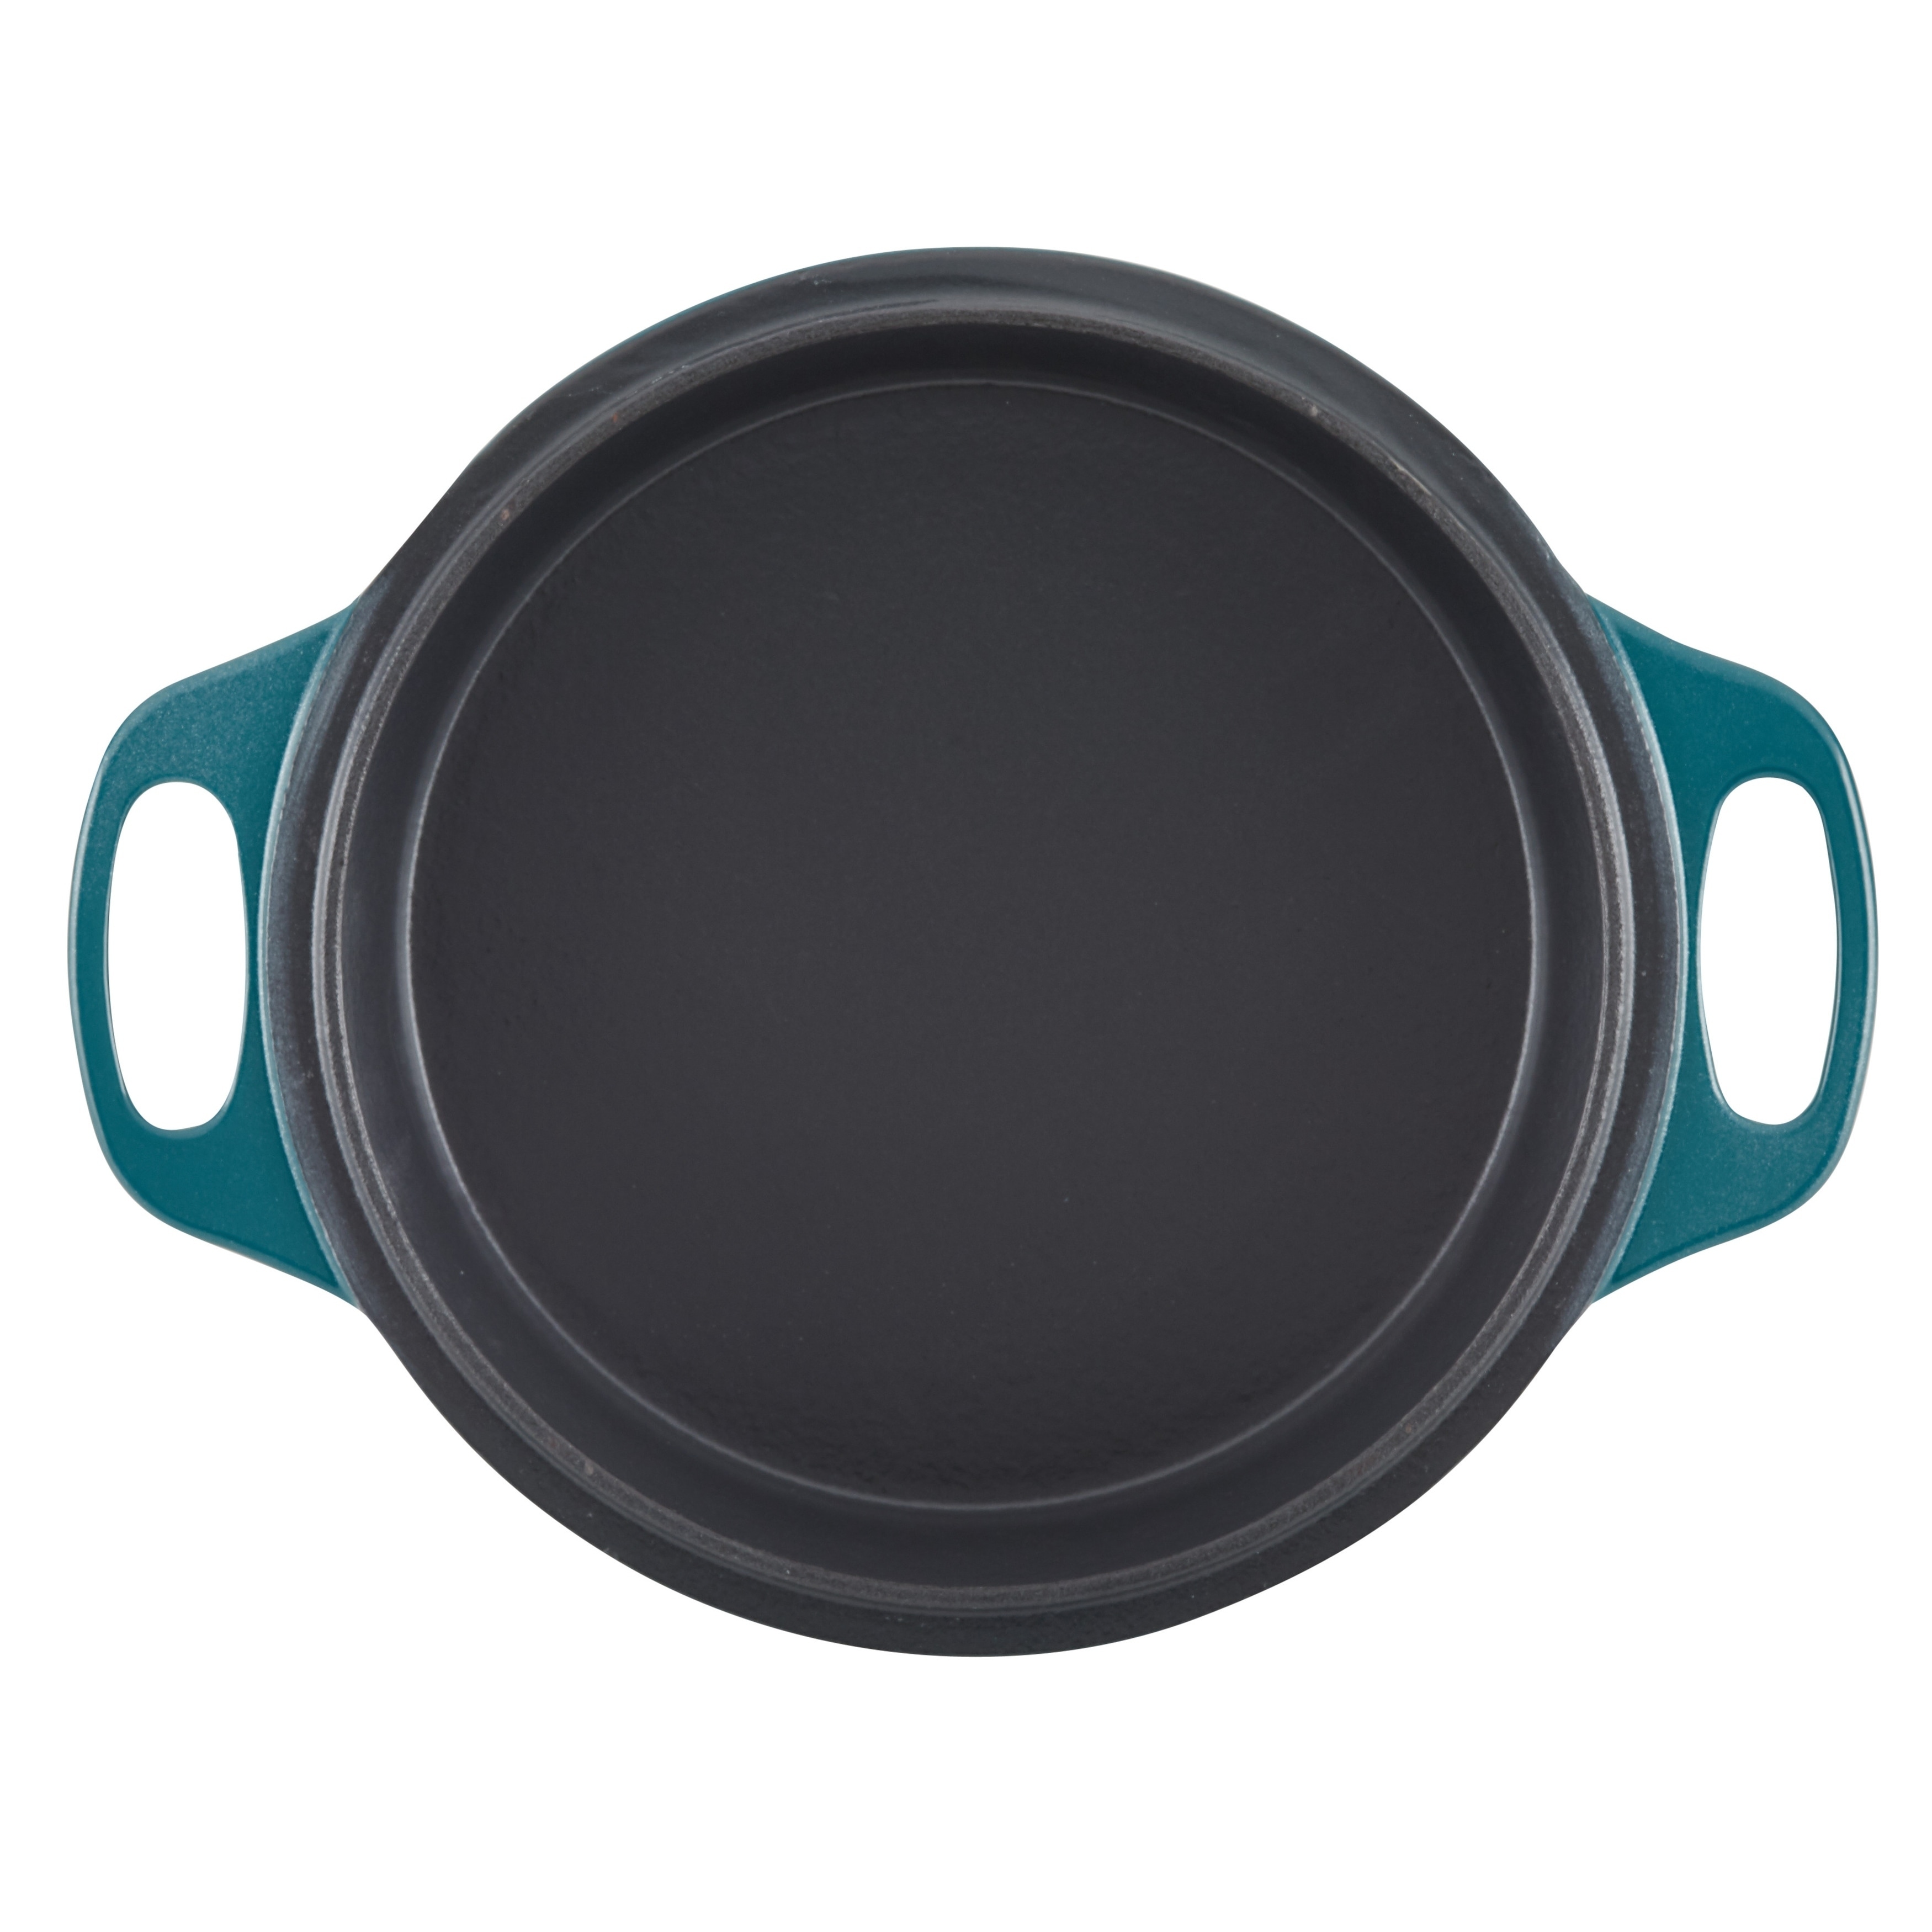 https://ak1.ostkcdn.com/images/products/28663957/Rachael-Ray-Cast-Iron-4-Qt.-Casserole-with-10-Griddle-Teal-Shimmer-6ea3fcb1-ec96-470d-8569-93fdaeeaa014.jpg